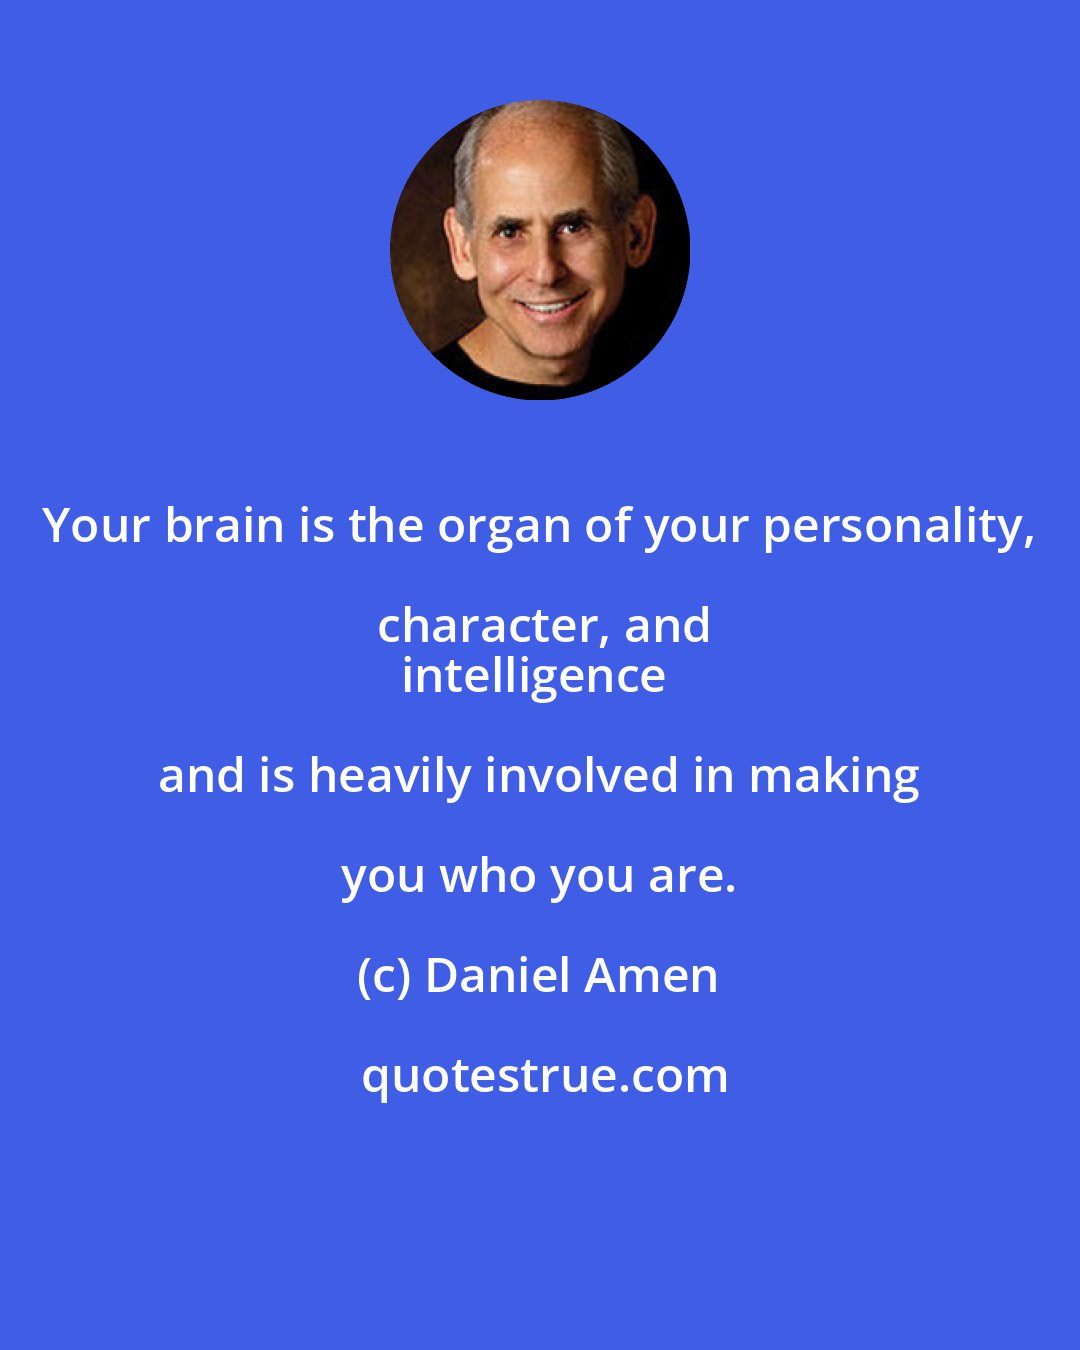 Daniel Amen: Your brain is the organ of your personality, character, and
intelligence and is heavily involved in making you who you are.